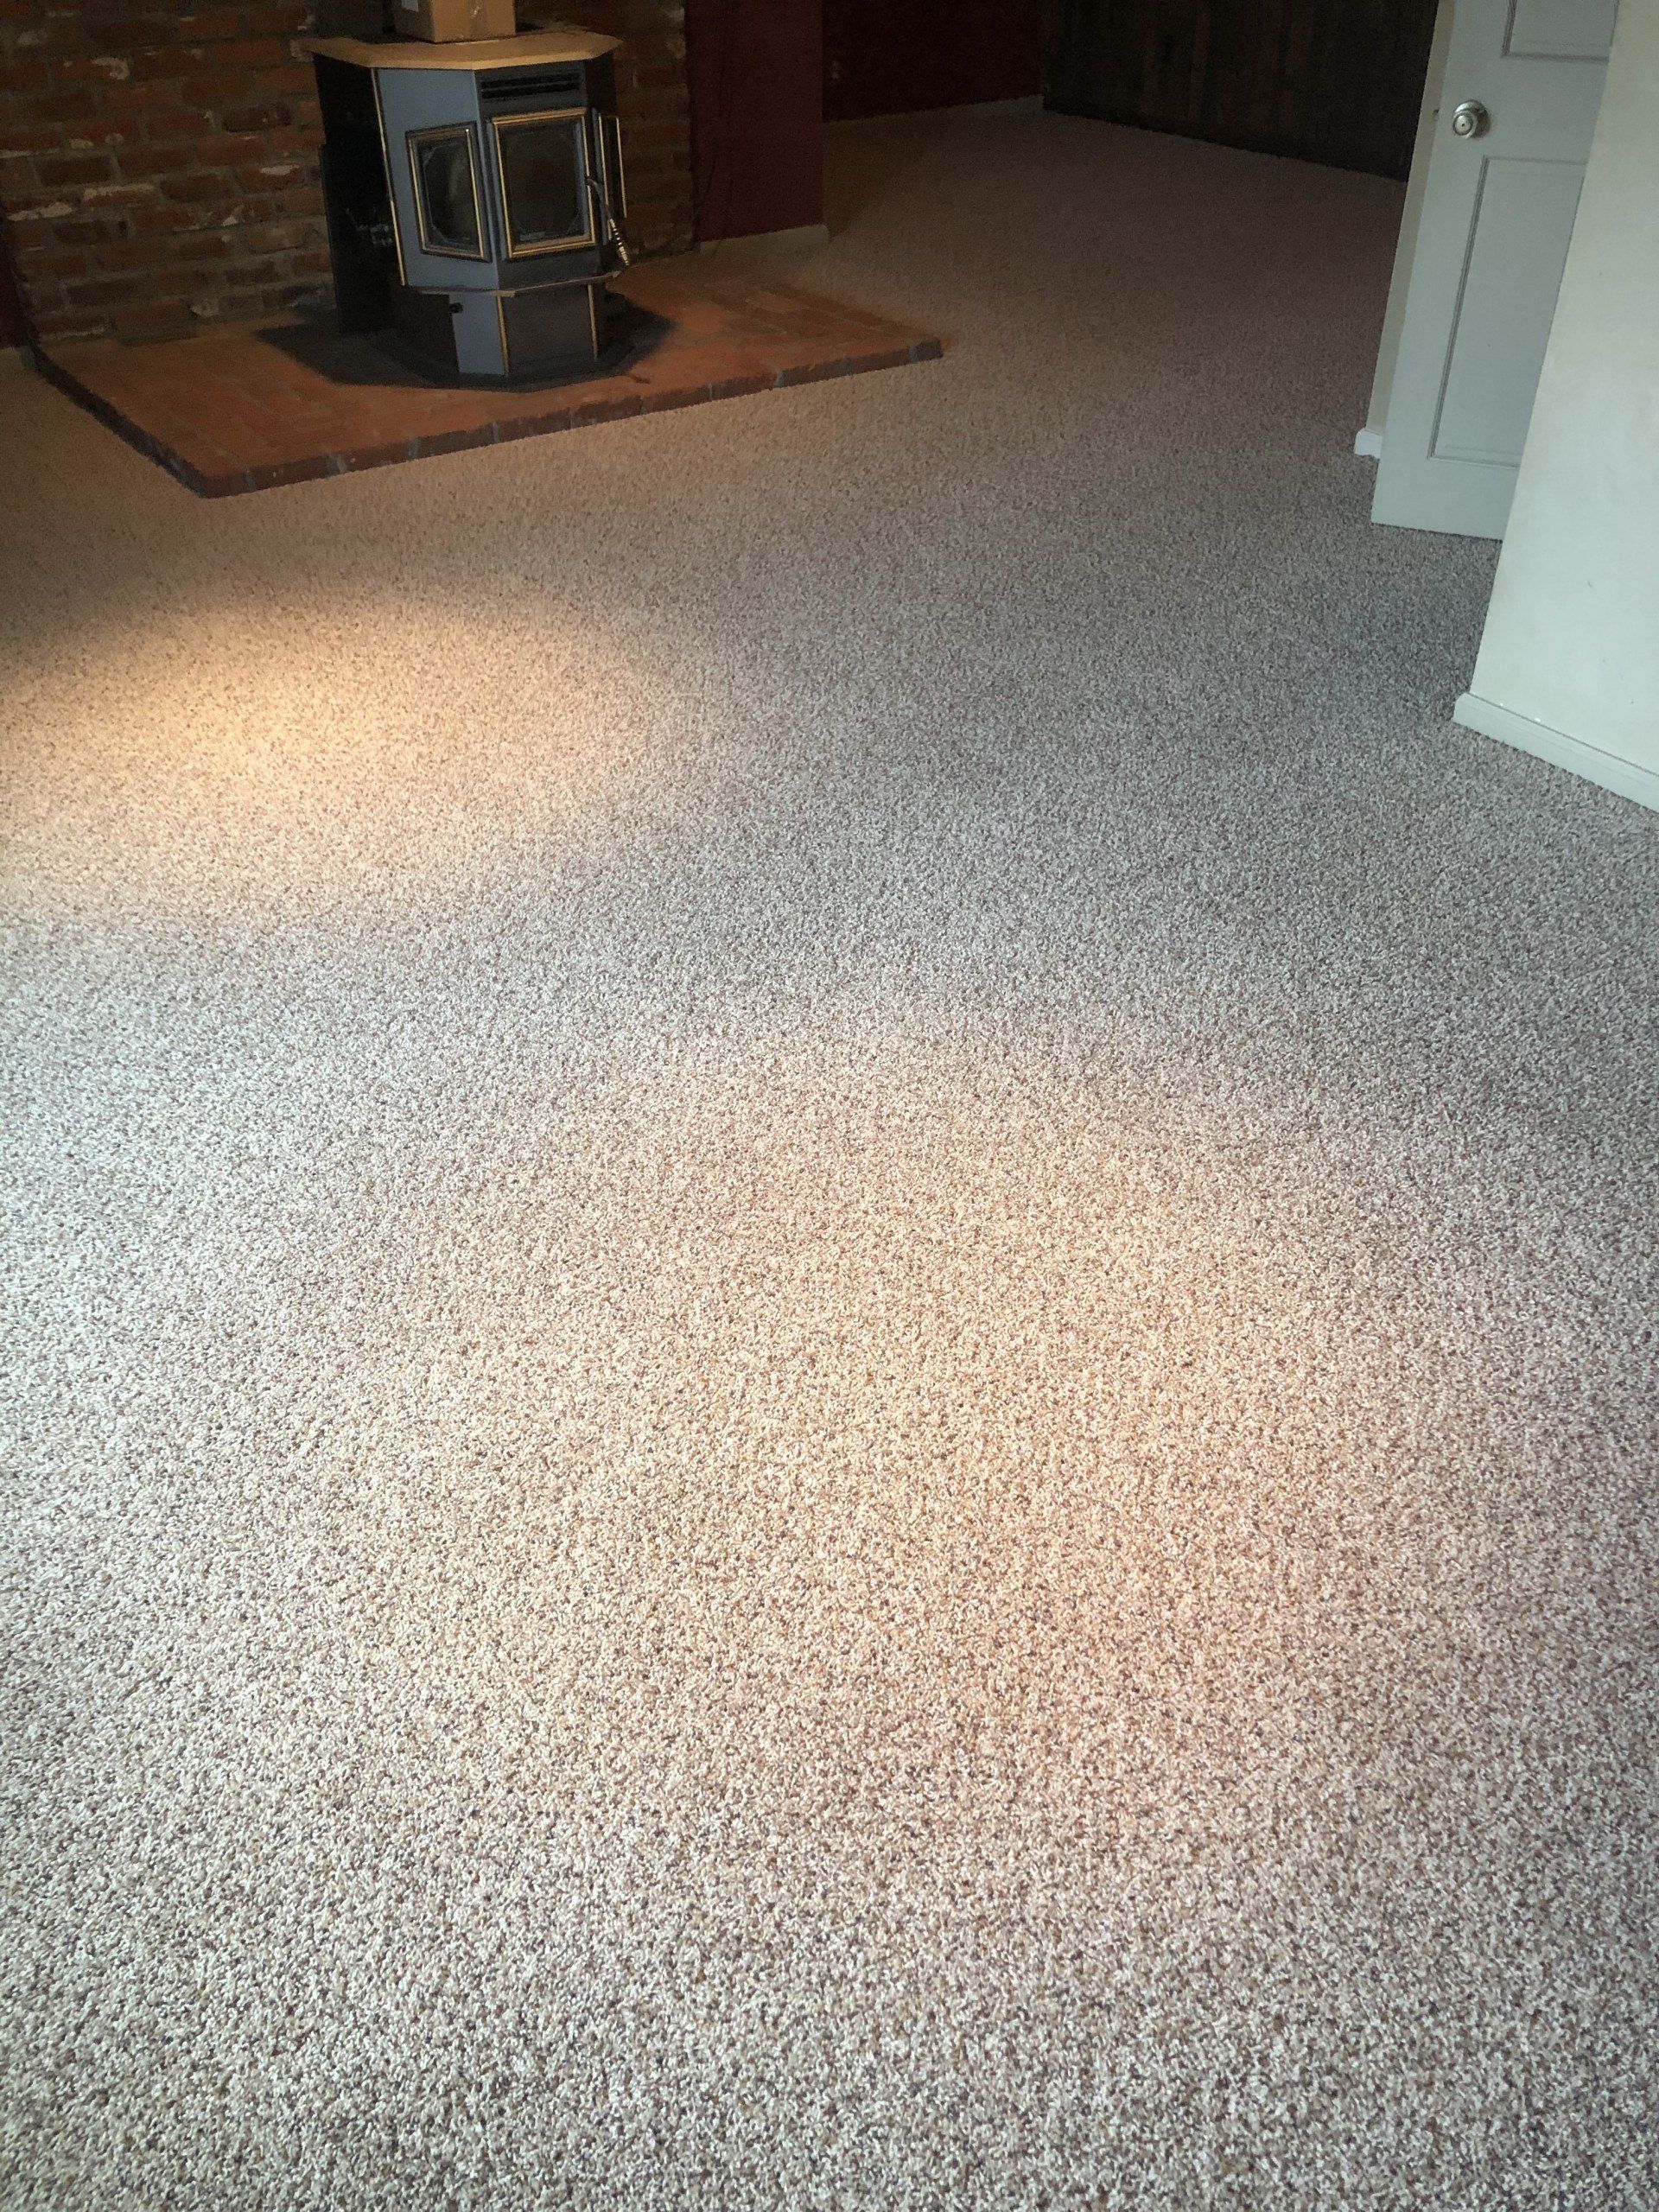 After Carpet Cleaning Photo